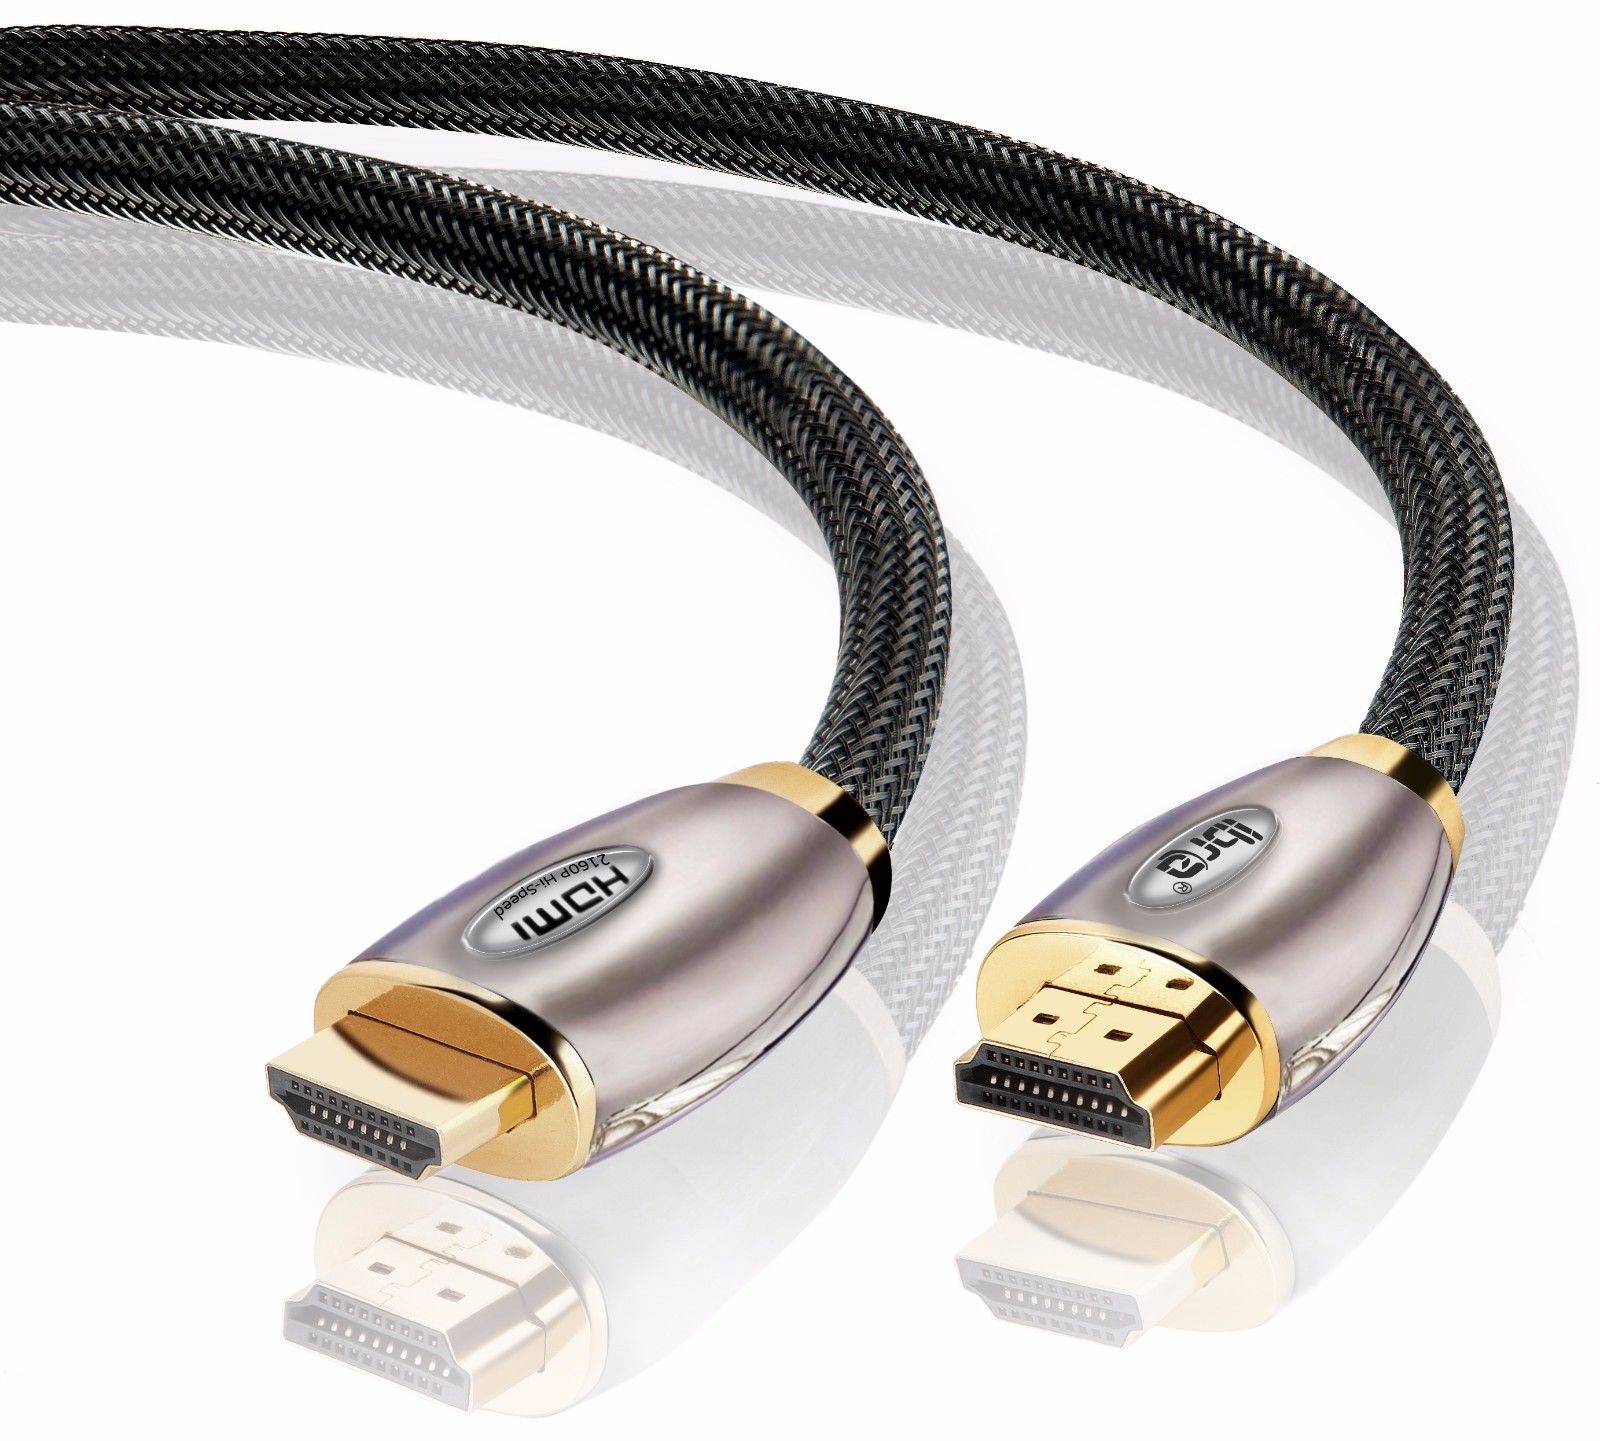 HDMI Cable 1.5M - 4K UHD HDMI 2.0(4K@60Hz) Ready -18Gbps-28AWG Braided Cord -Gold Plated Connectors -Ethernet,Audio Return -Video 4K 2160p,HD 1080p,3D -Xbox PlayStation PS3 PS4 PC Apple TV - IBRA RED